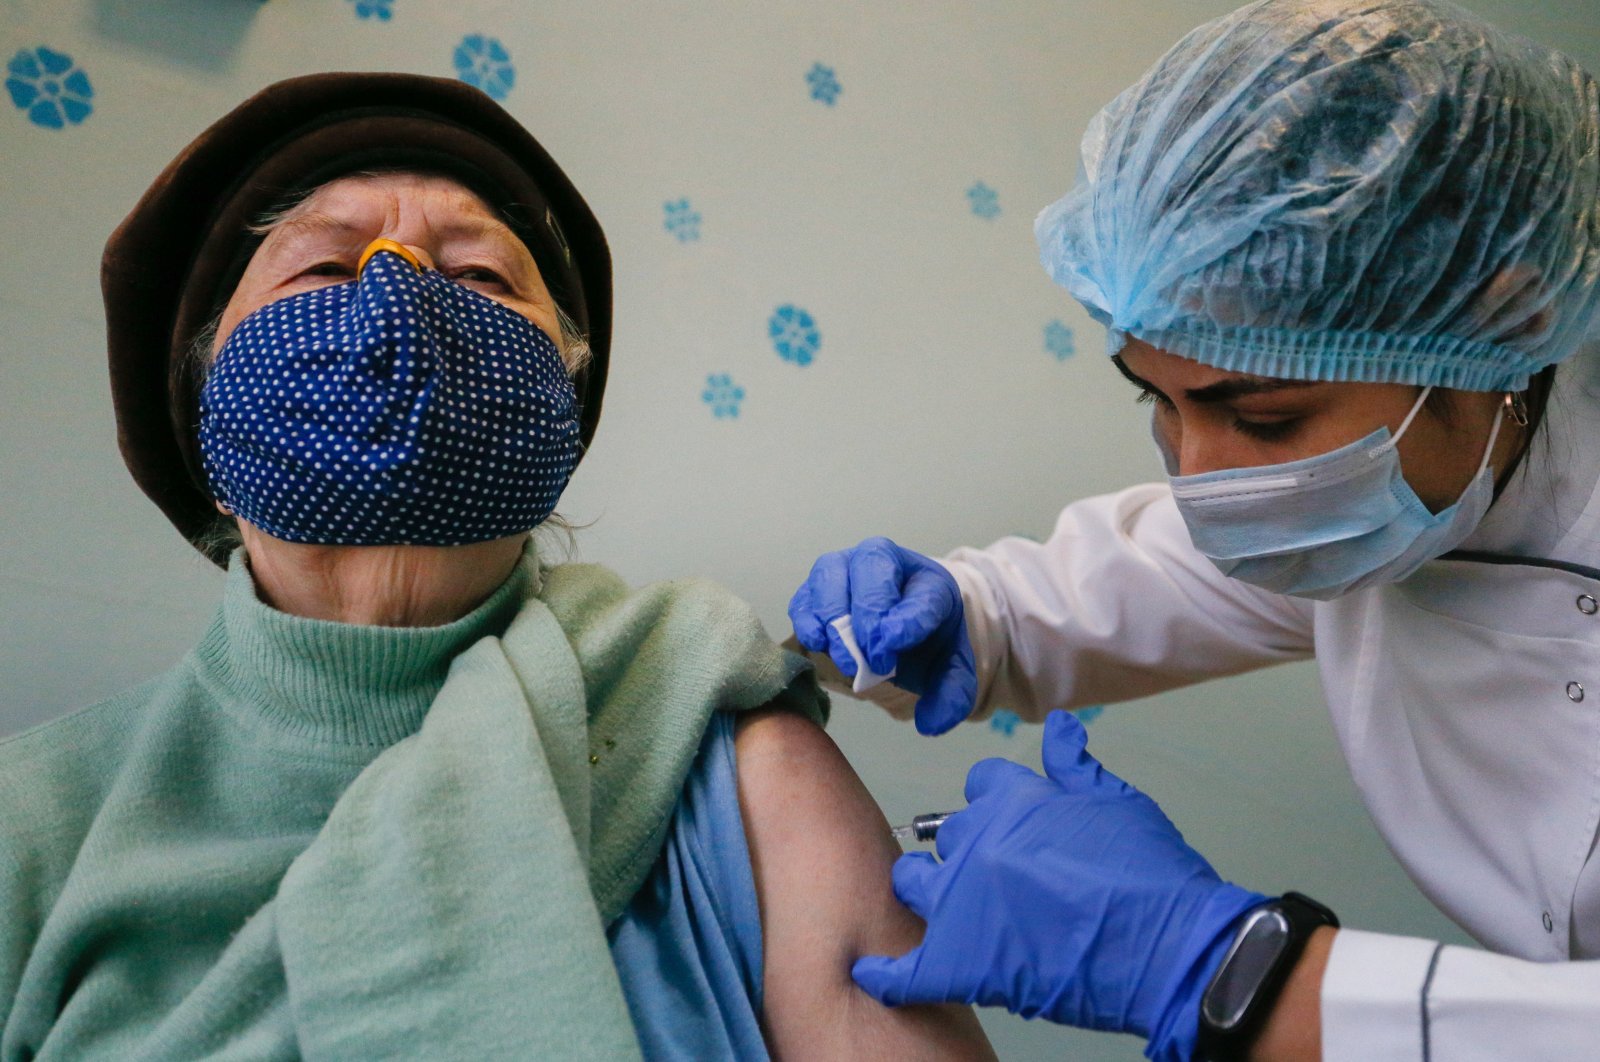 A medical worker administers a flu vaccine to a patient in the pro-Russian militant-controlled city of Donetsk, Ukraine, Nov. 18, 2020. (EPA-EFE Photo)